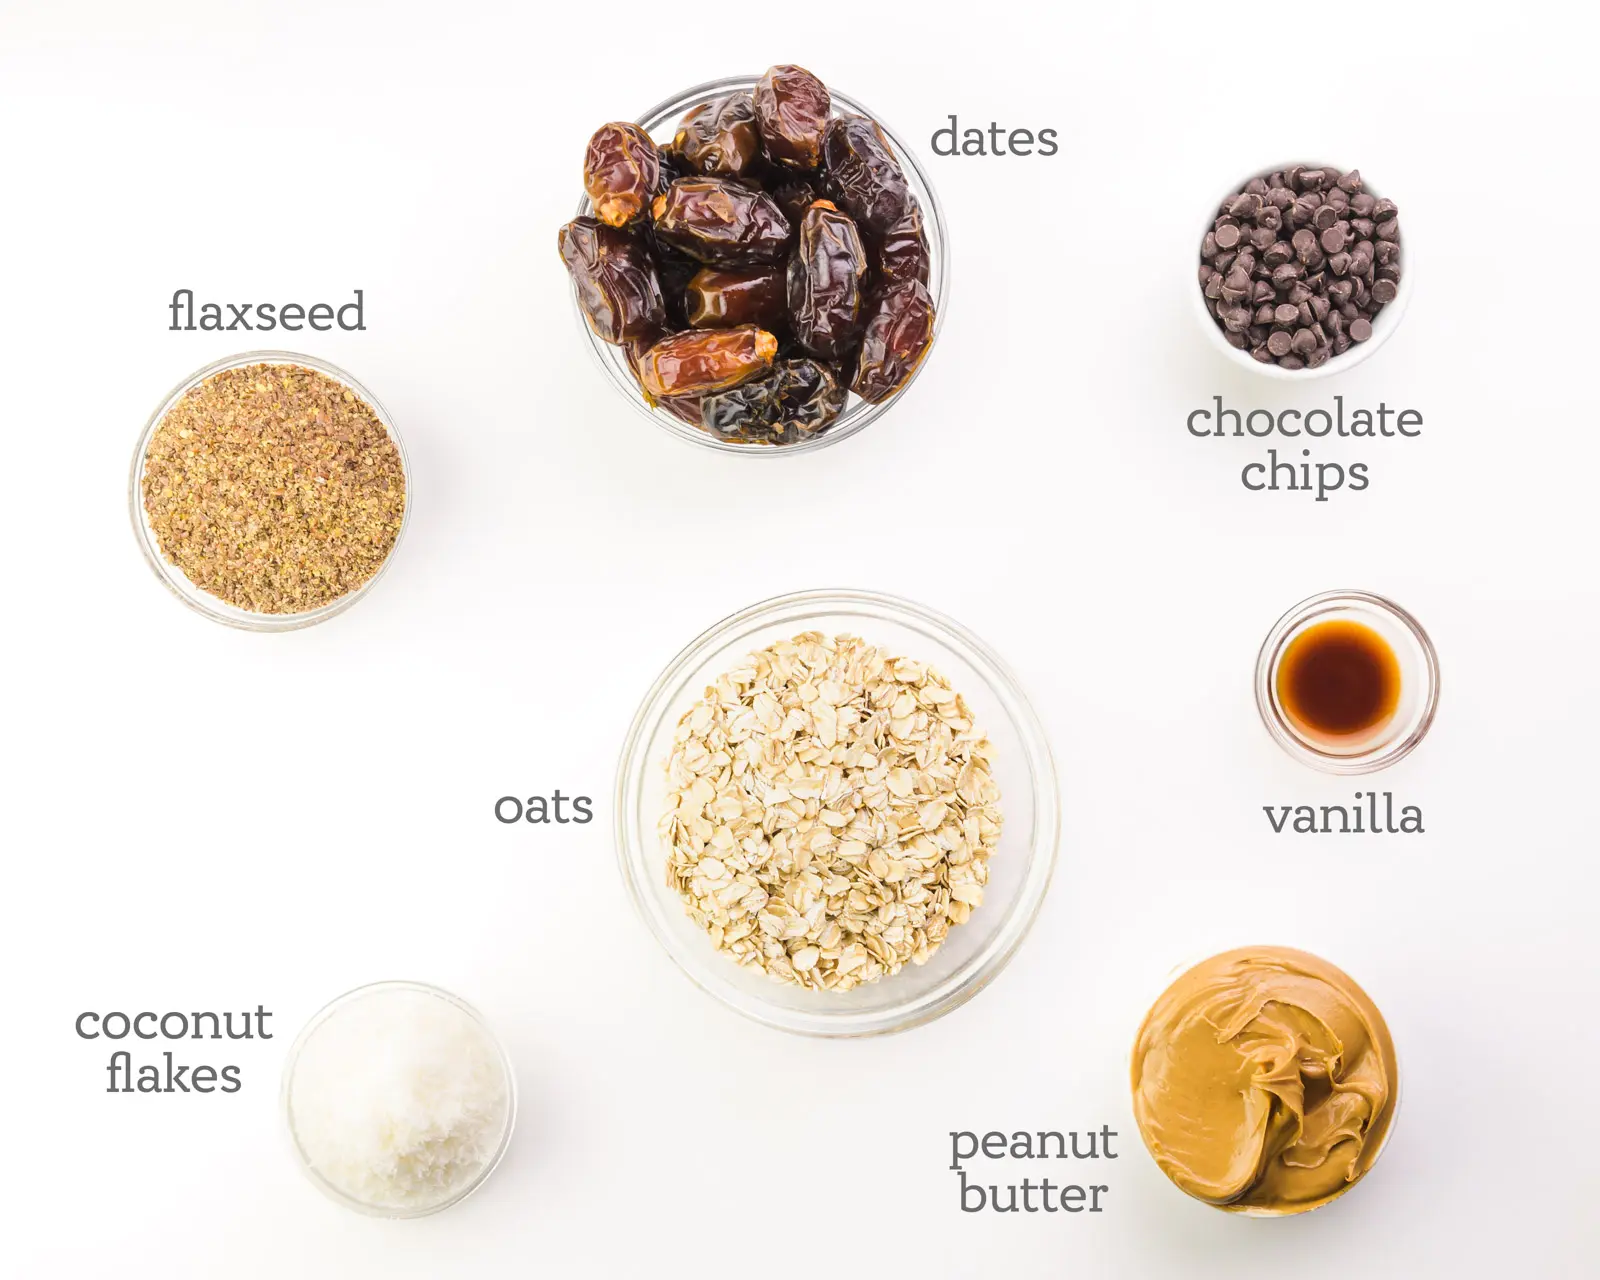 Ingredients are laid out on a table. The labels next to each ingredient reads, Chocolate chips, vanilla, peanut butter, oats, coconut flakes, flaxseed, and dates.